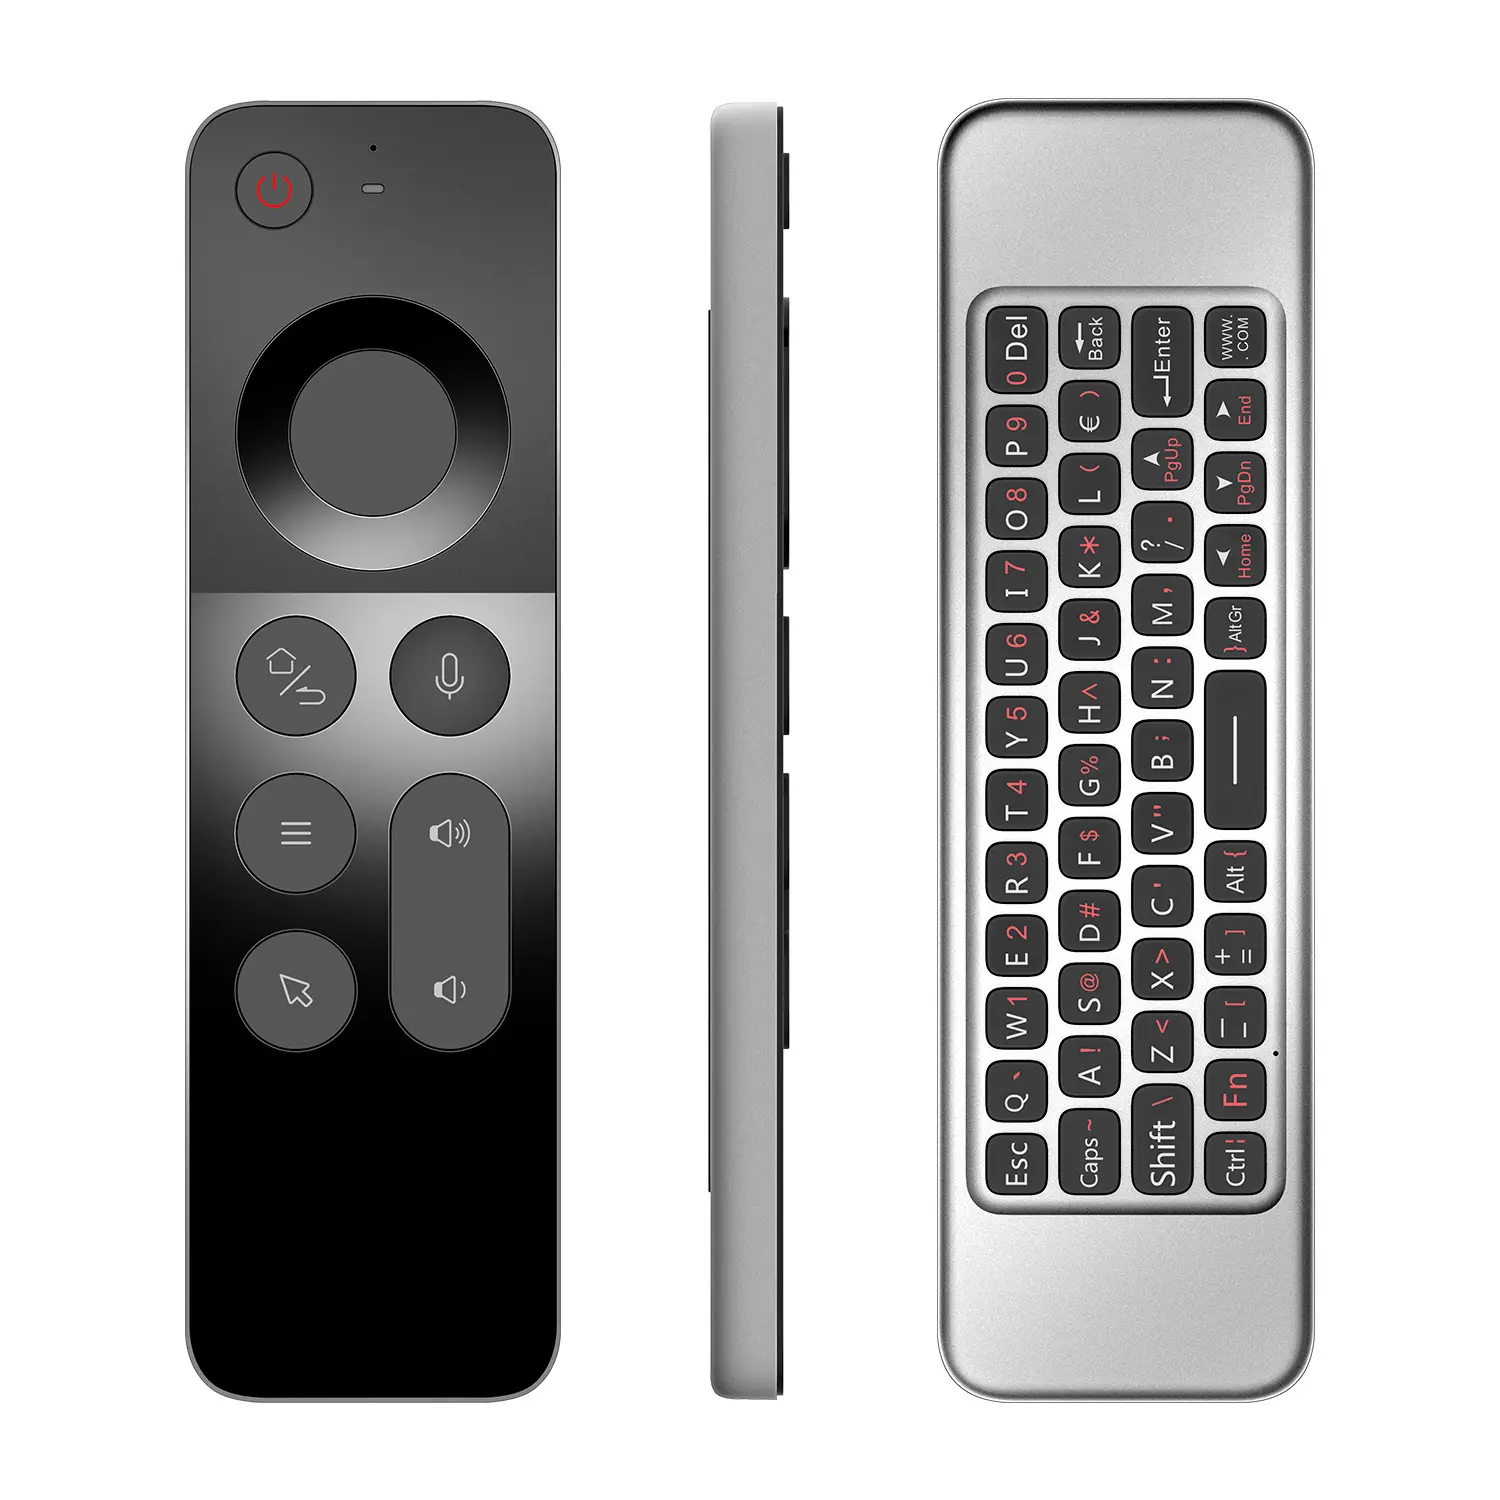 X508-1 W3 Remote Control Infrared 2.4g Wireless Voice Air Mouse Controller With Usb Receiver For Pc/smart Tv